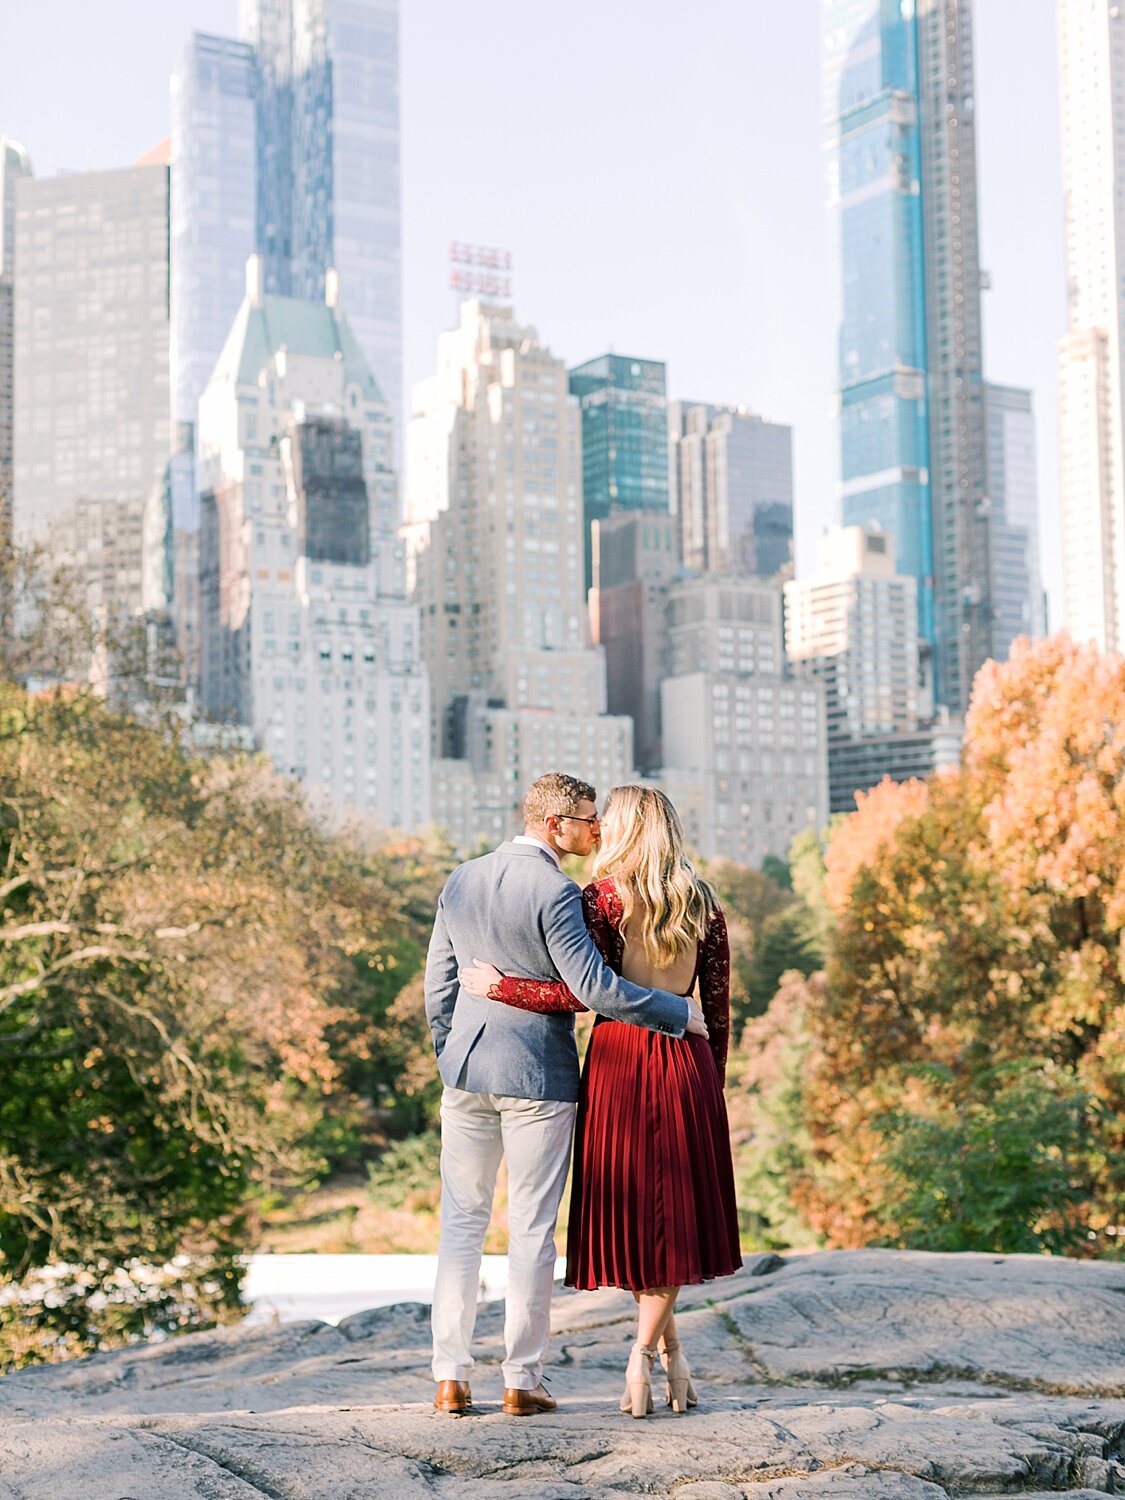 NYC engagement photos by Asher Gardner Photography